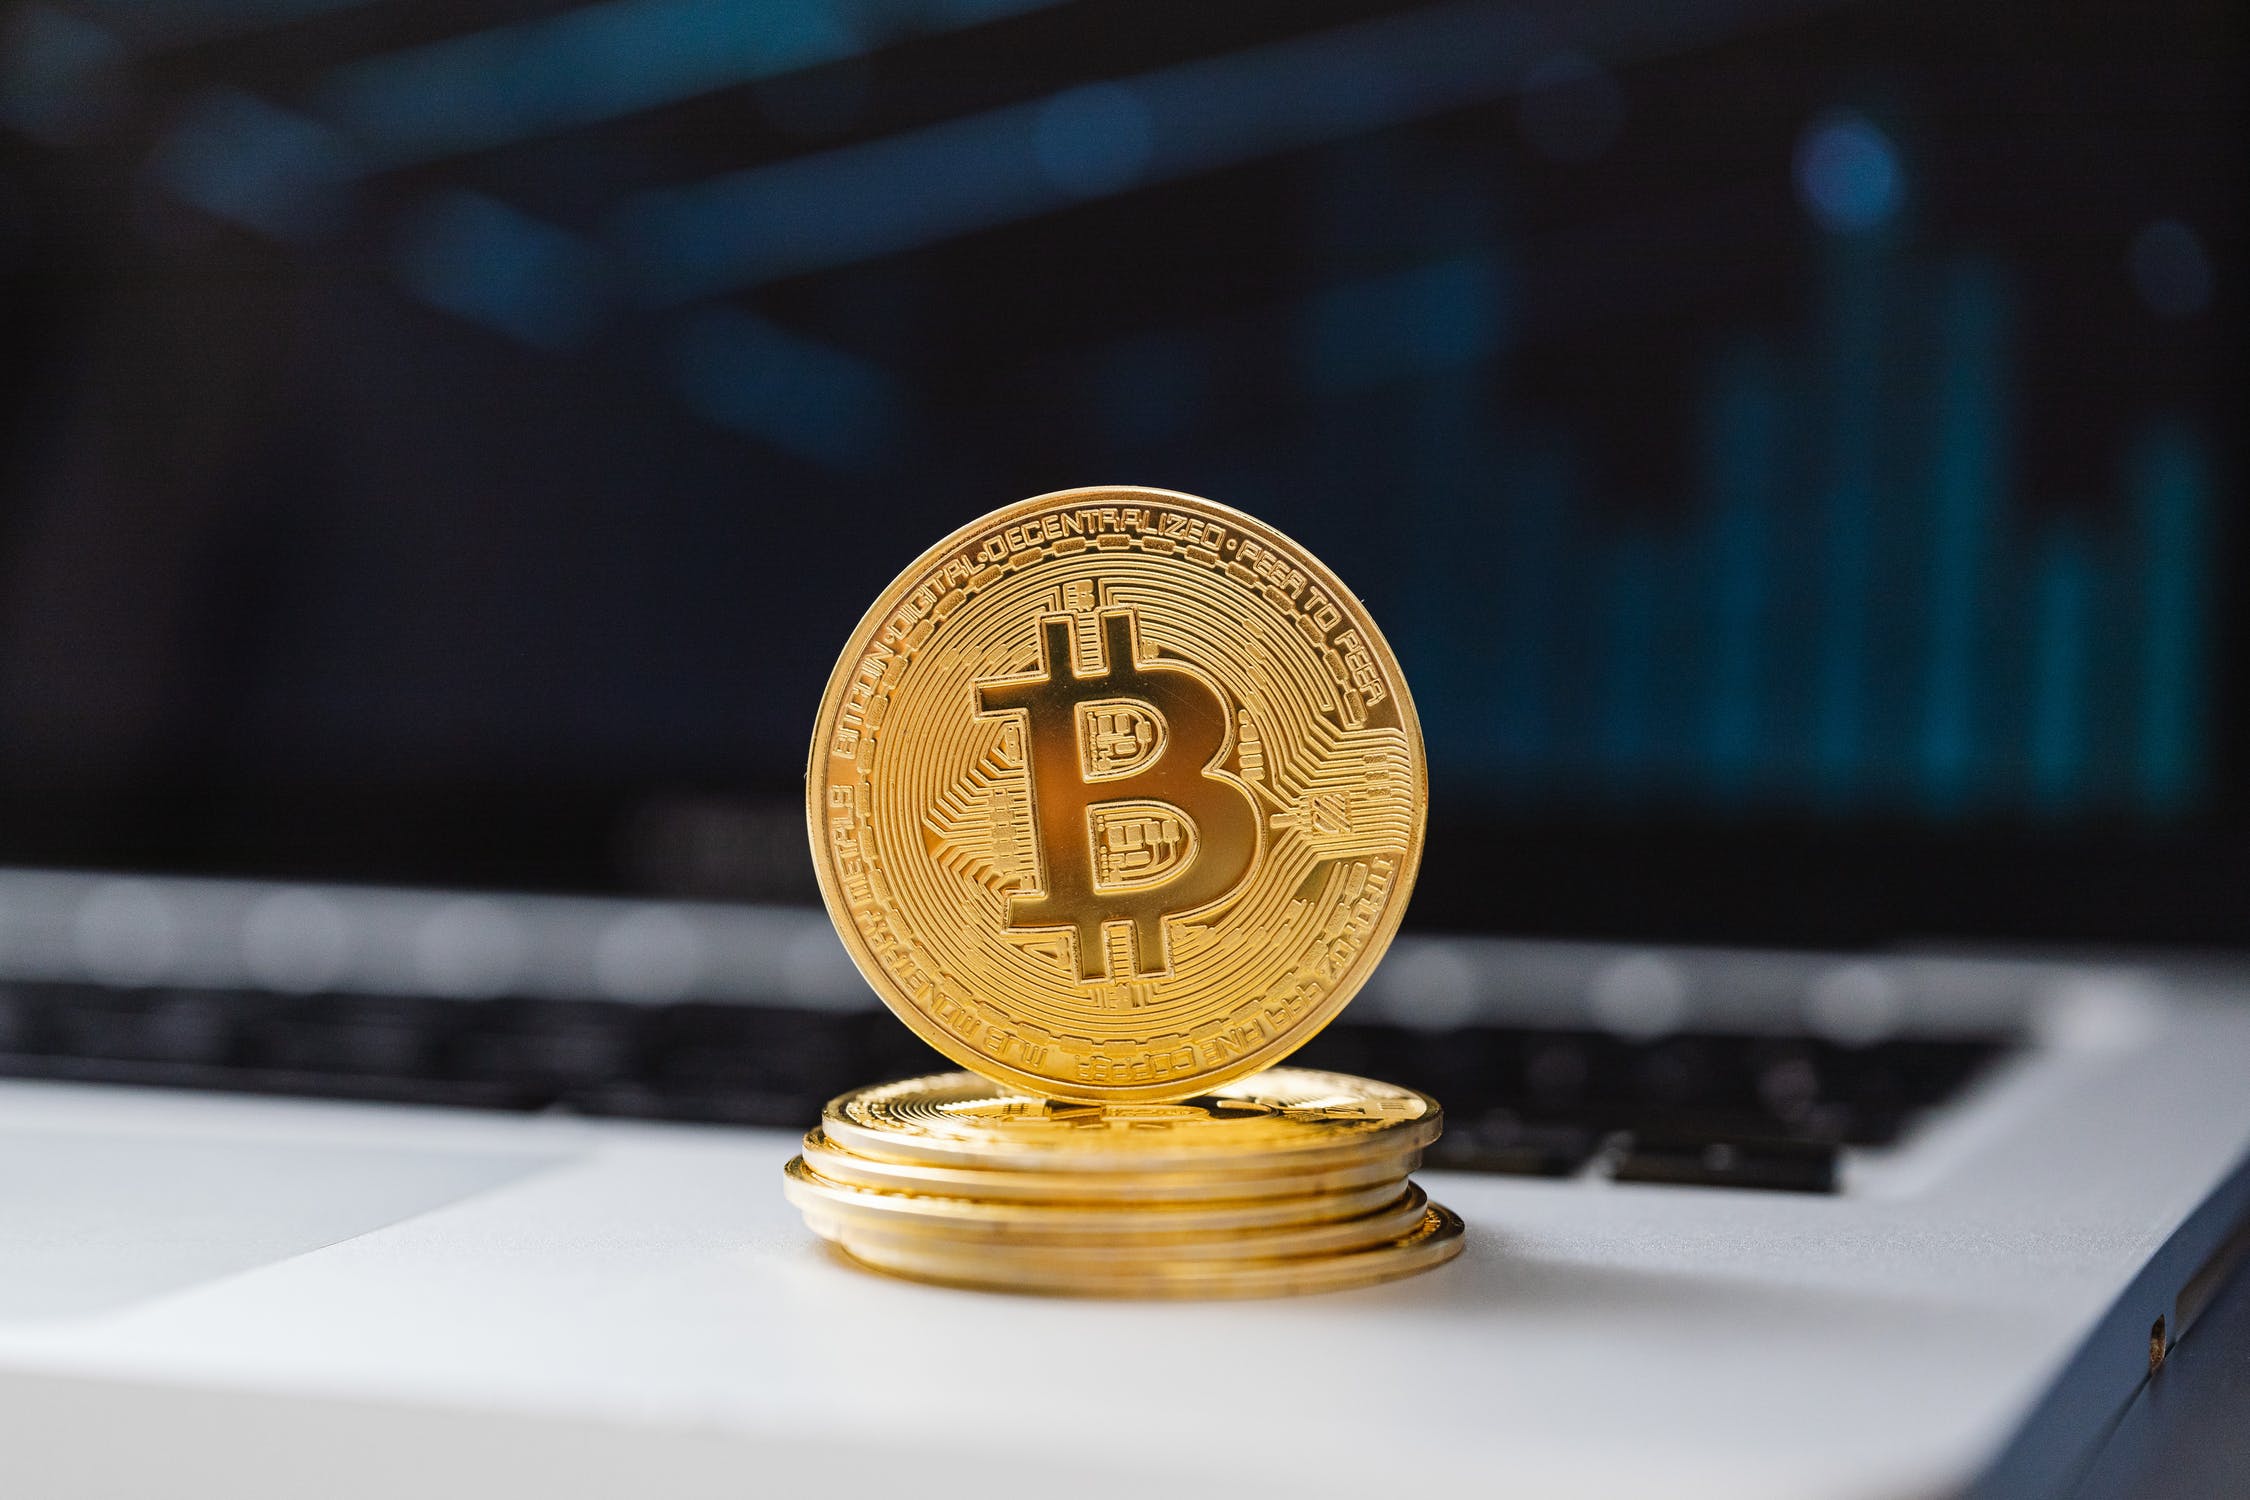 Read this article to know more about Top Cryptocurrencies to Invest in 2021